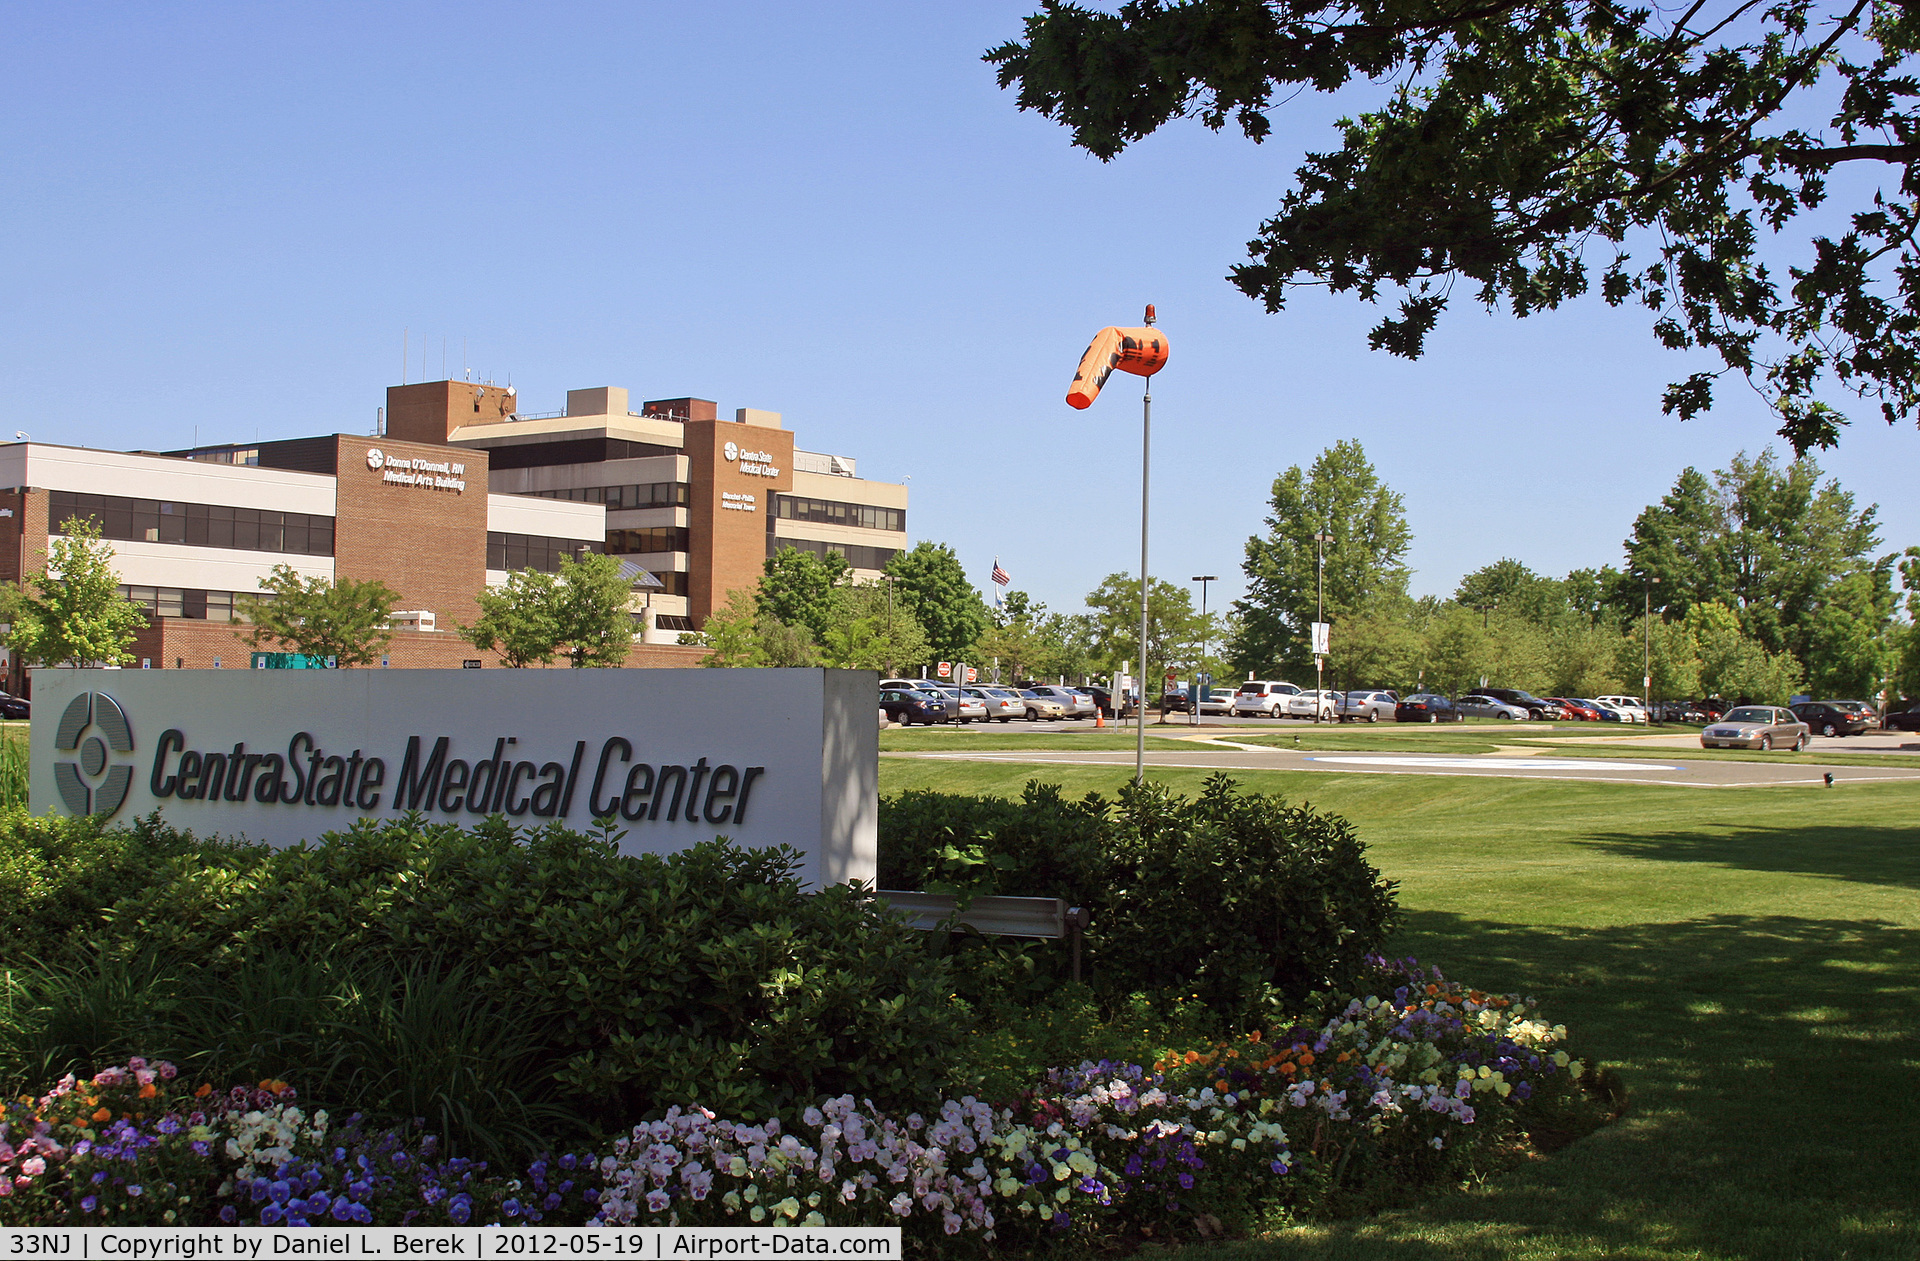 Centra State Medical Center Heliport (33NJ) - This modern Central Jersey medical faclity boasts a nicely landscaped emergency heliport.